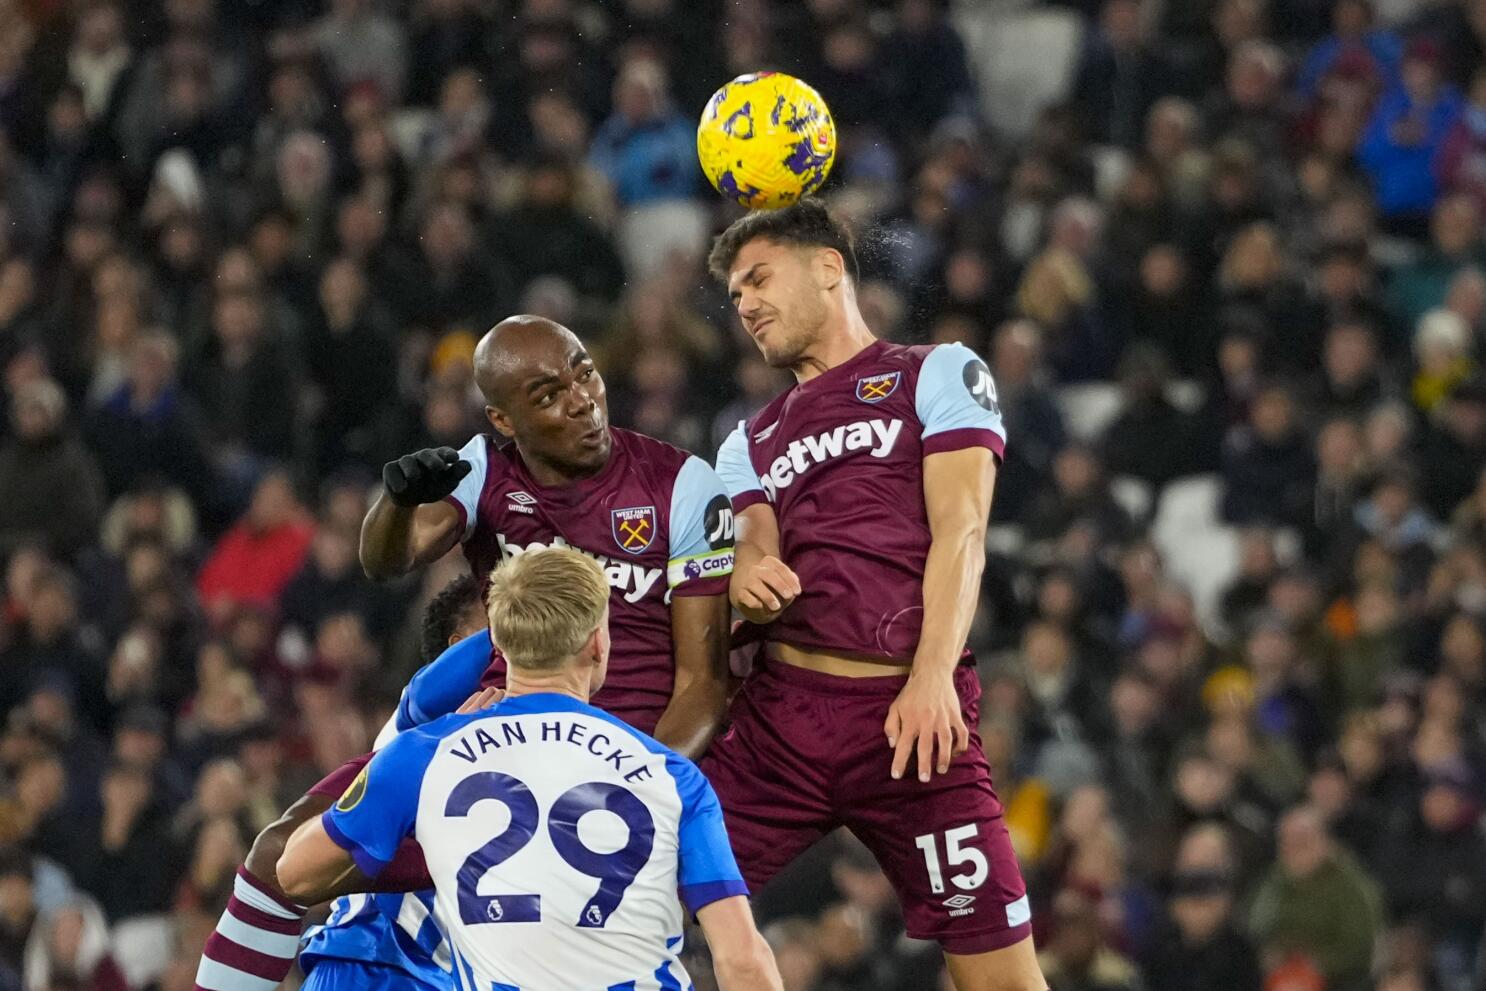 West Ham and Brighton settle for 0-0 draw in Premier League - The San Diego Union-Tribune